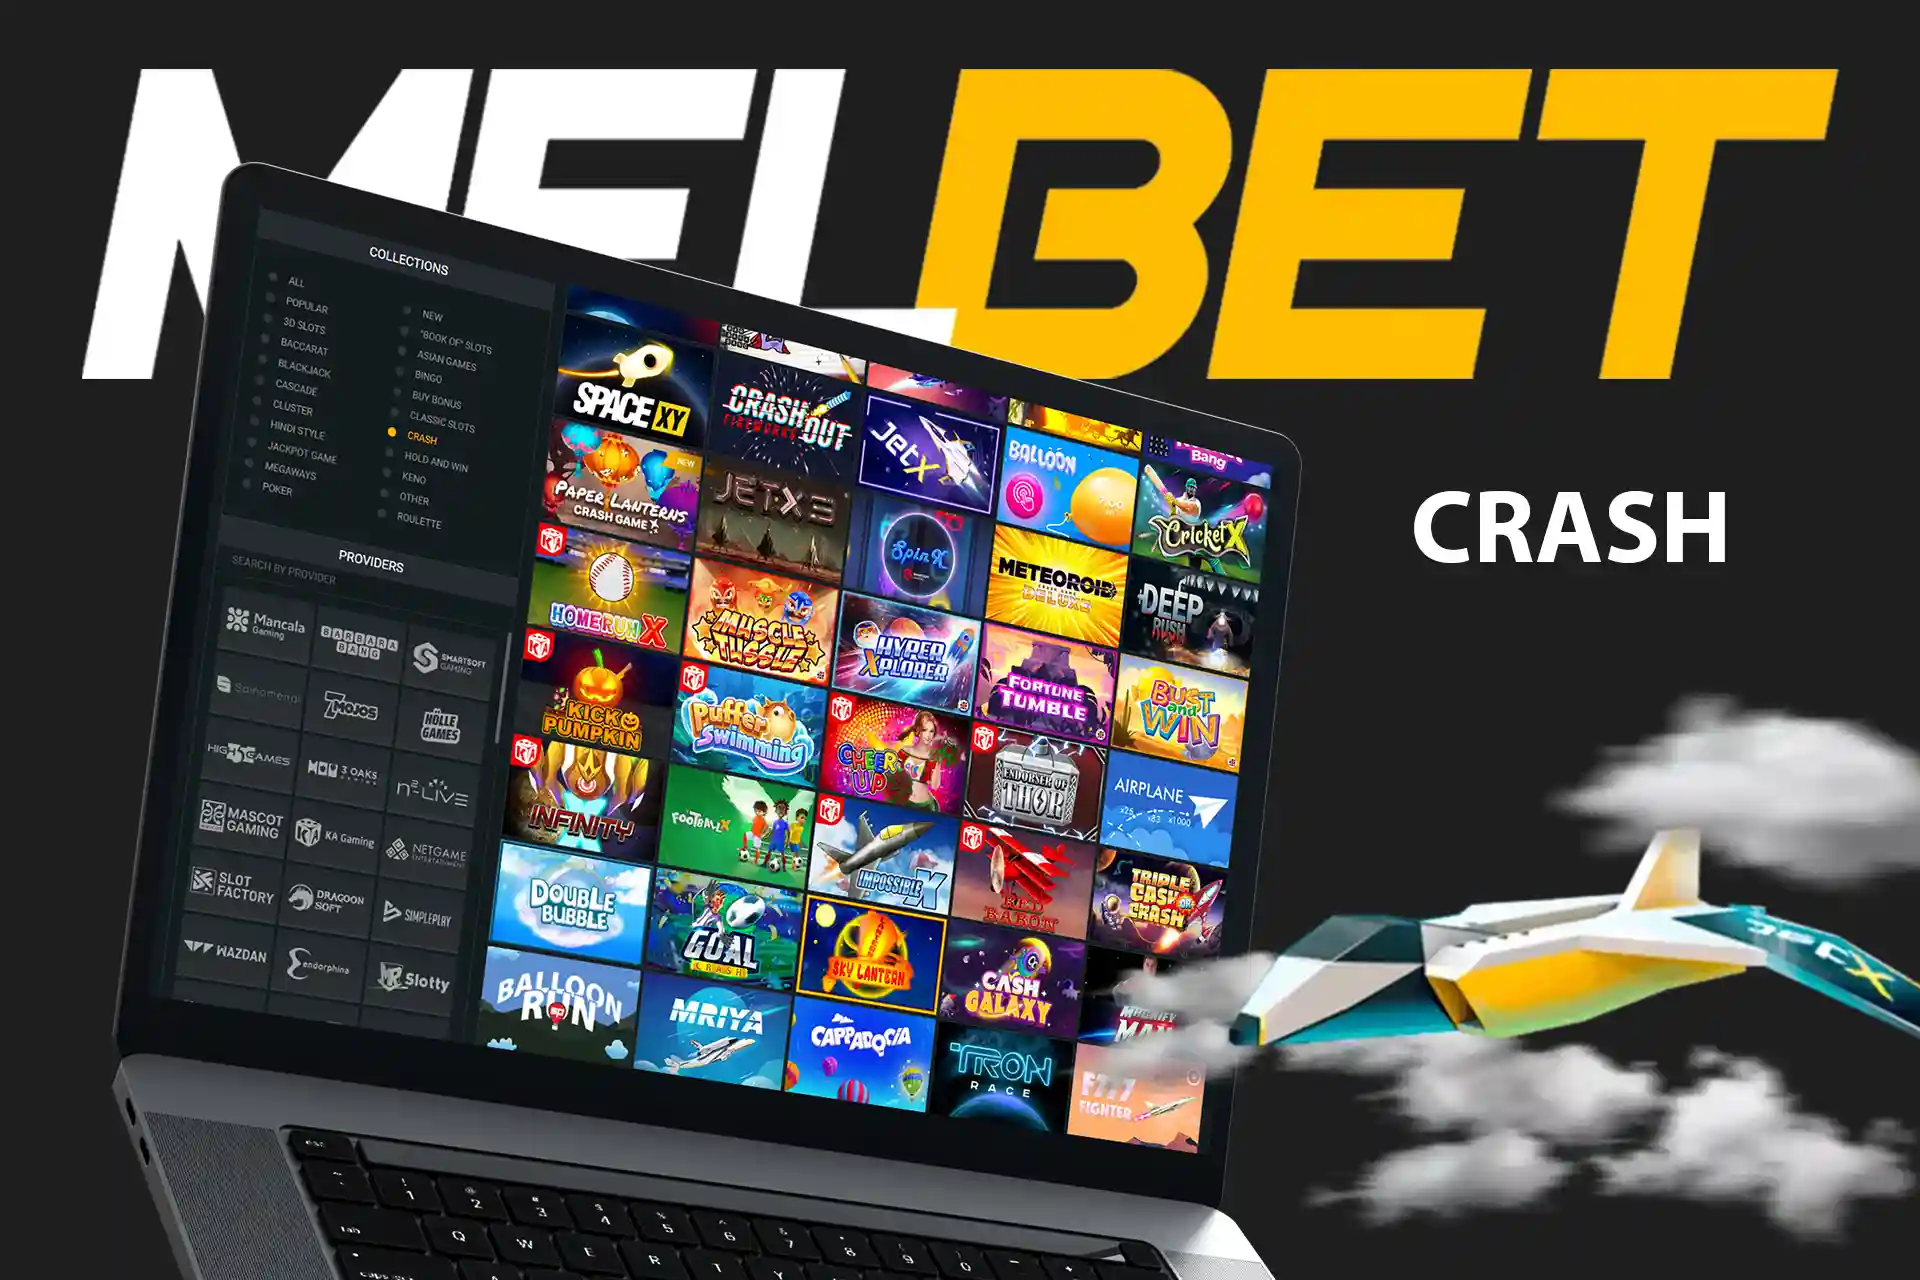 Play crash games at Melbet online casino and try your luck.